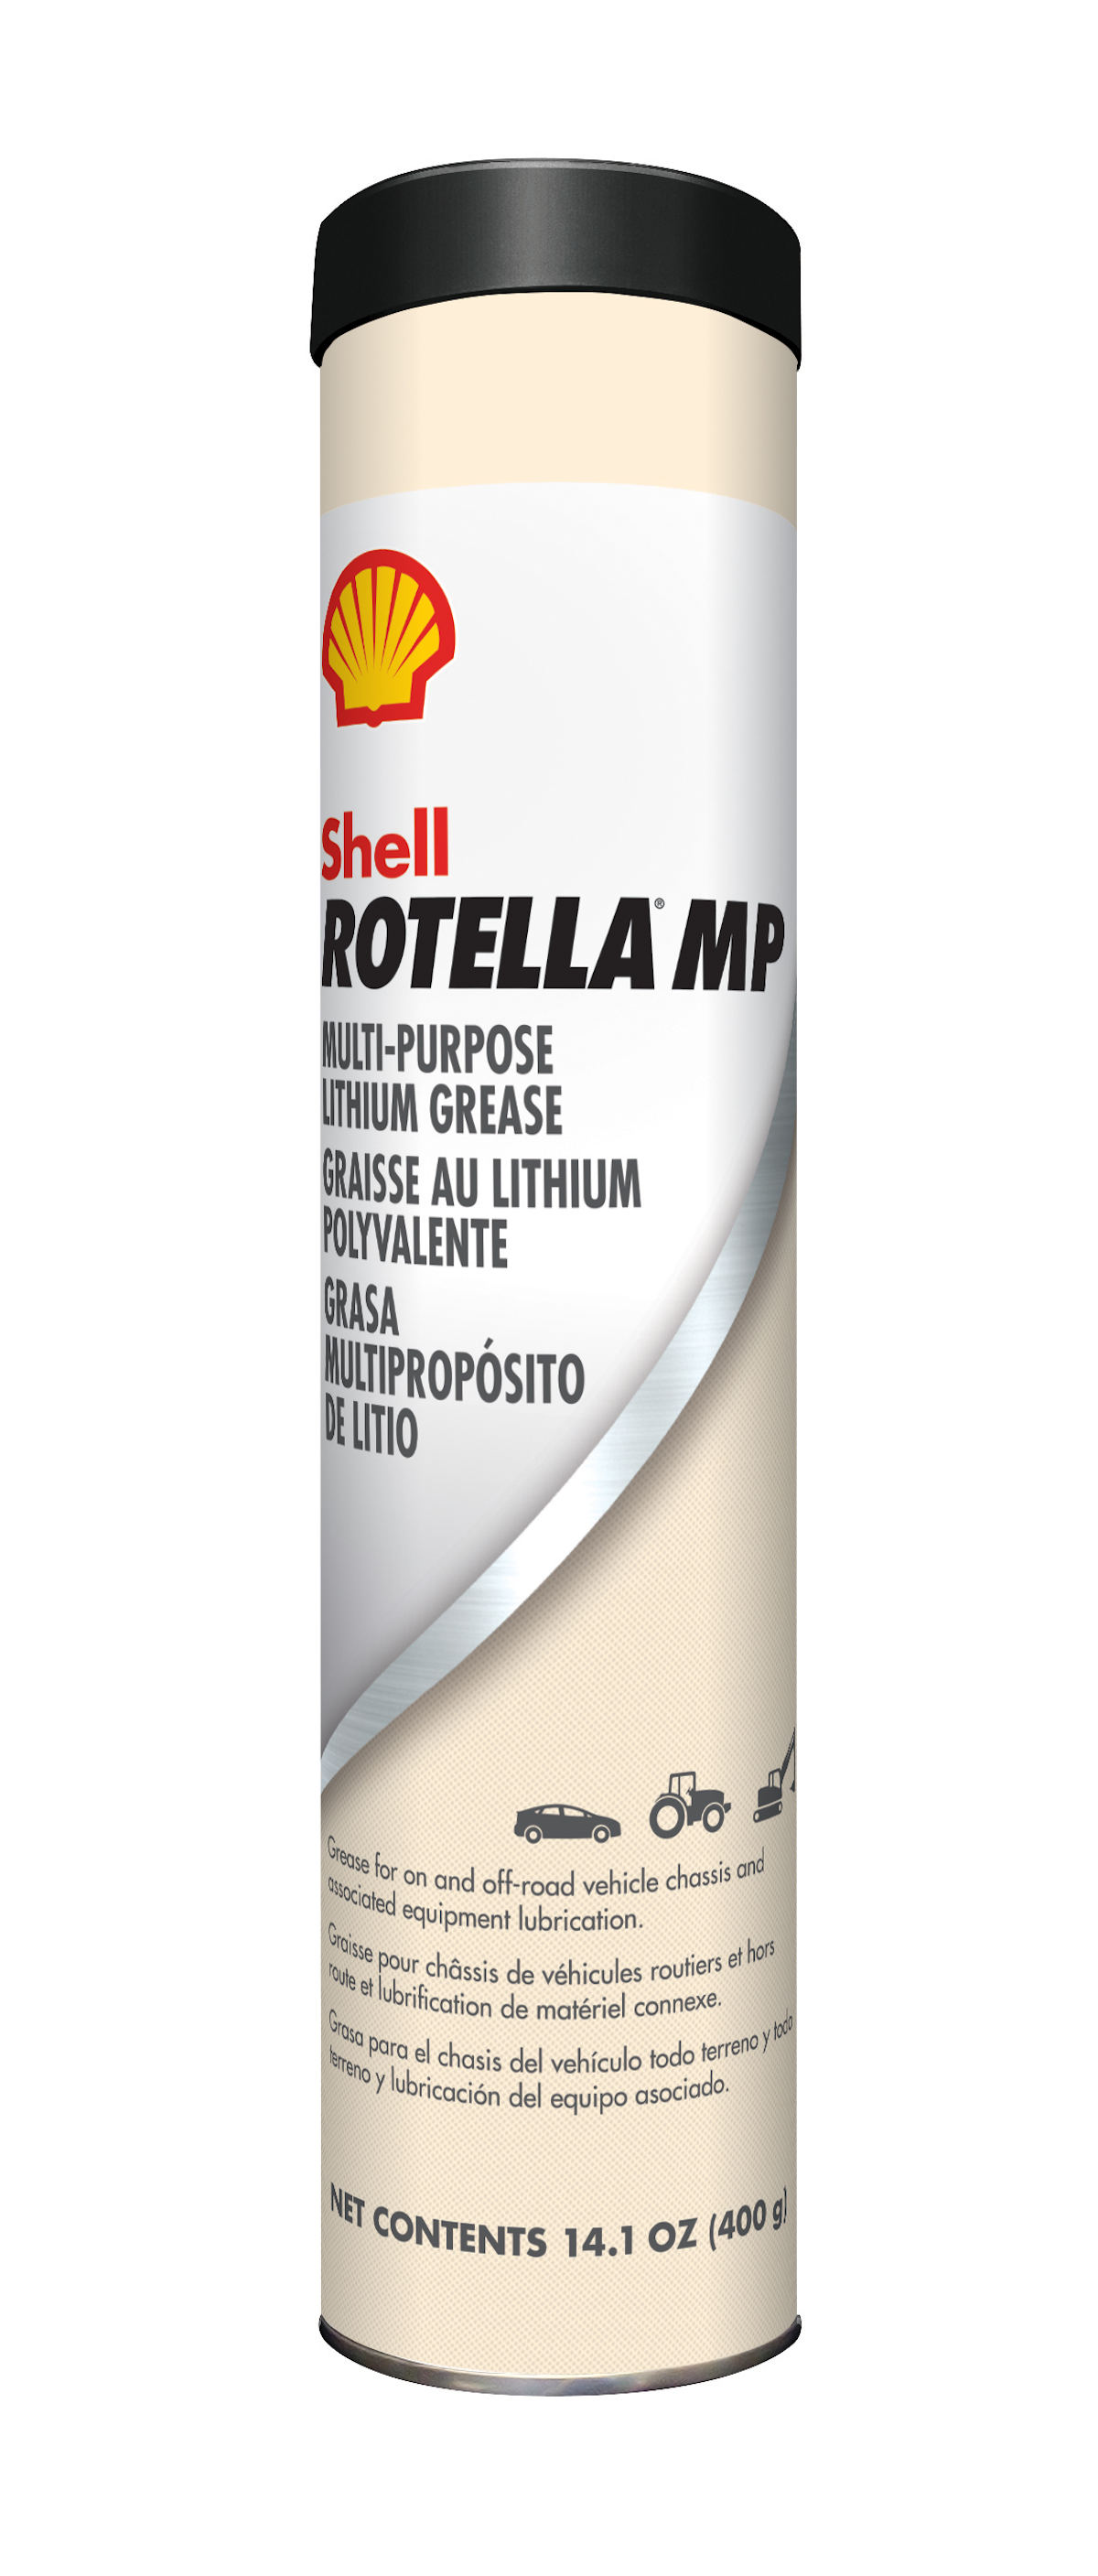 shell-rotella-mp-grease-from-shell-lubricants-for-construction-pros